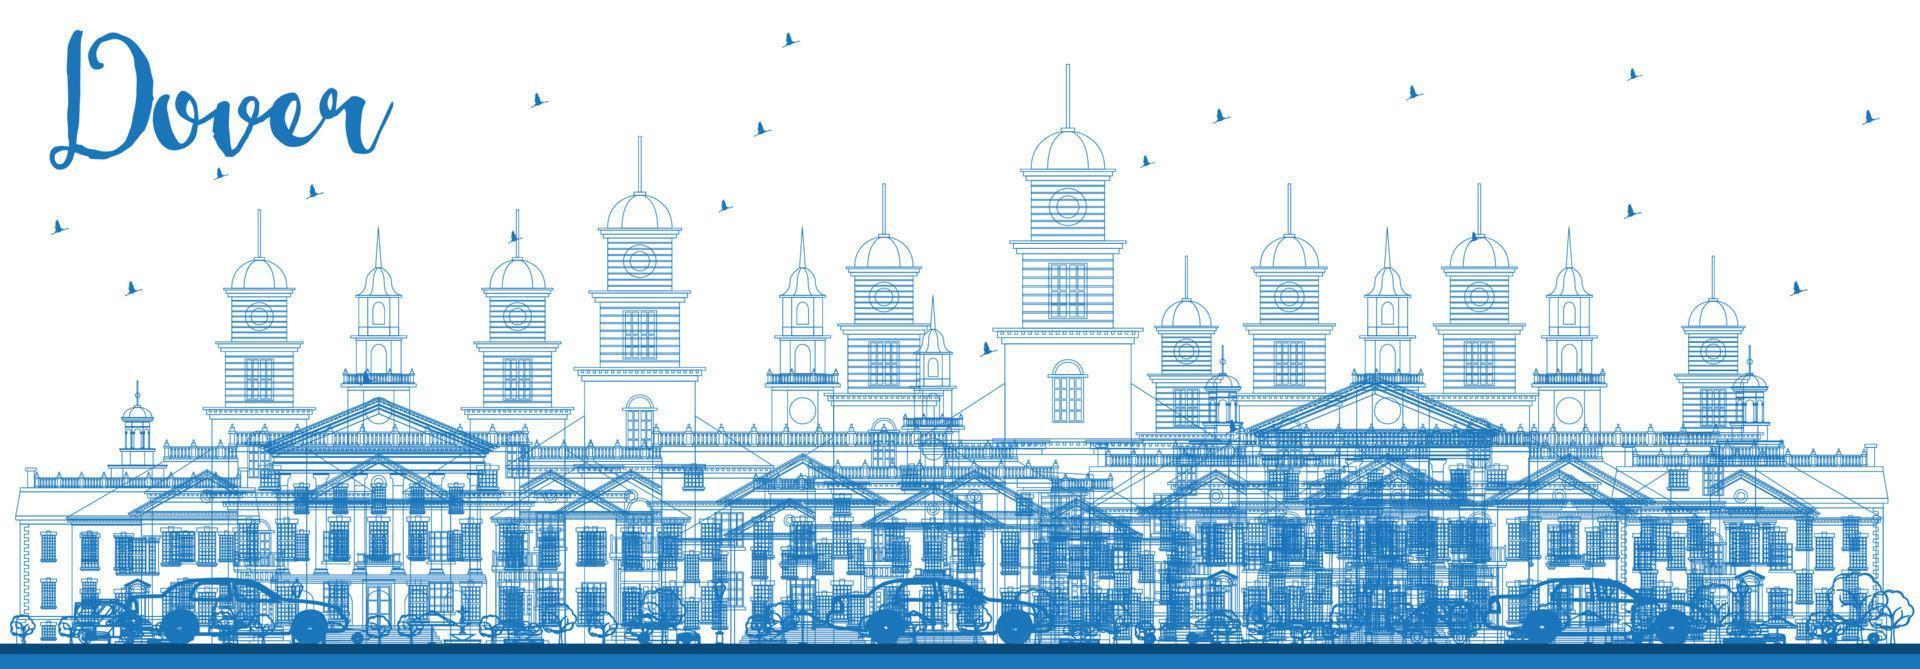 Outline Dover Skyline with Blue Buildings. vector